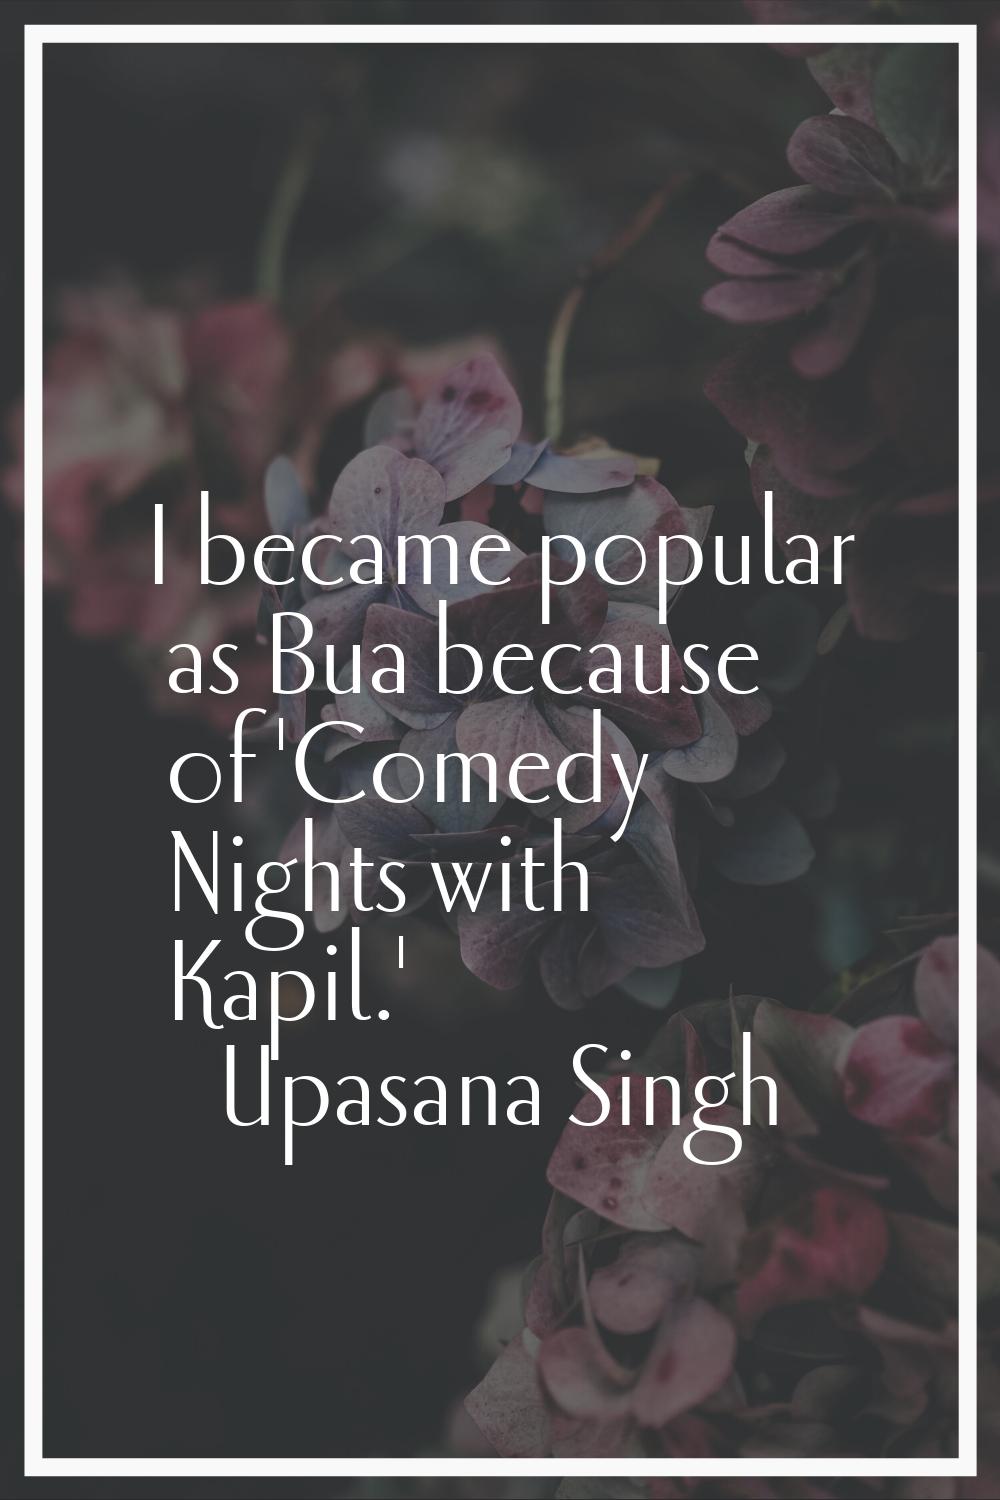 I became popular as Bua because of 'Comedy Nights with Kapil.'